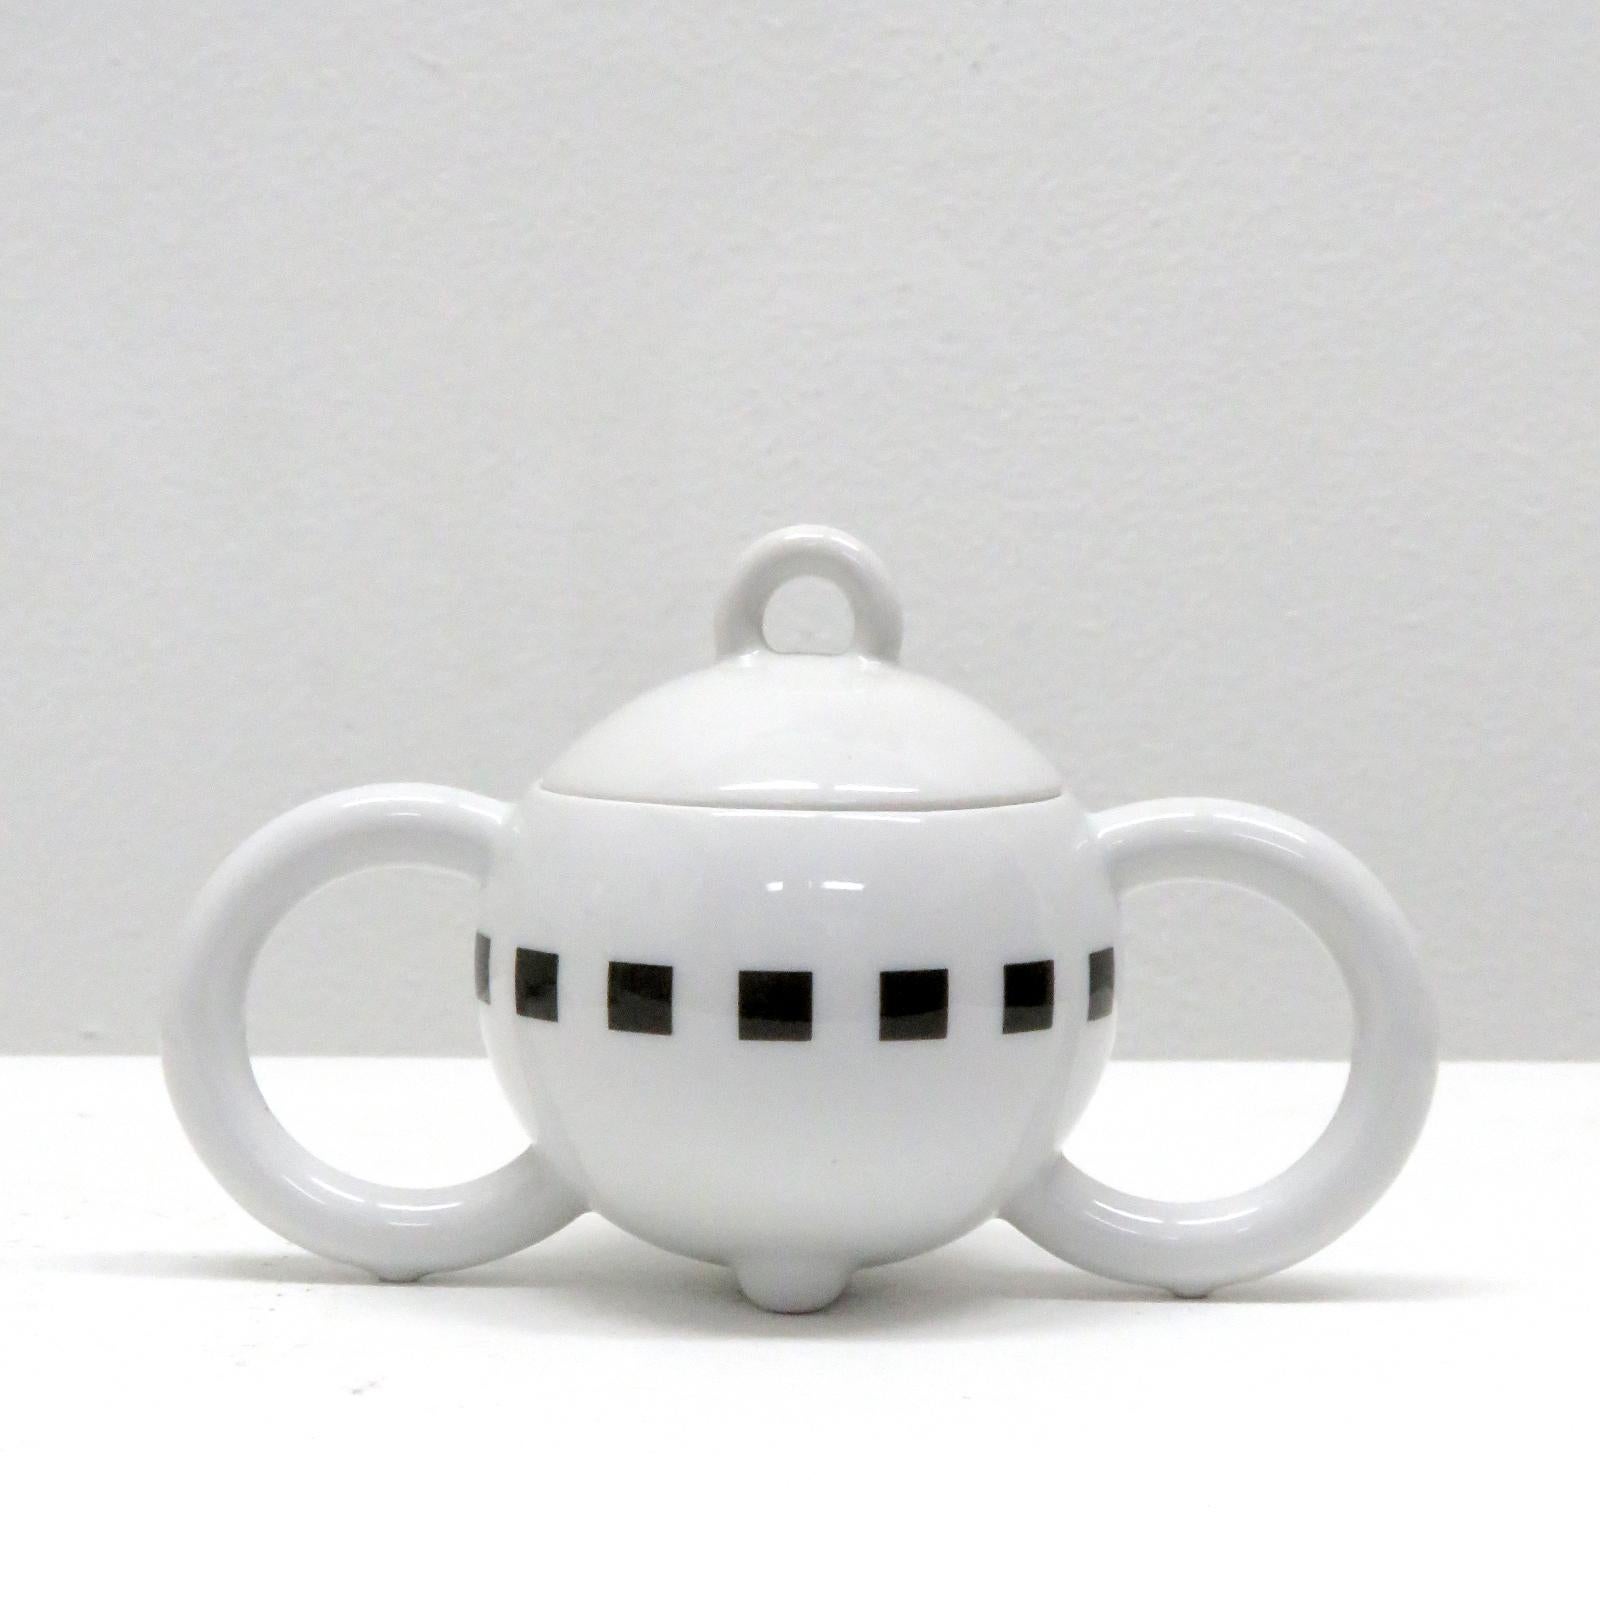 Tea Set 'Fantasia' by Matteo Thun, 1980 In Excellent Condition For Sale In Los Angeles, CA